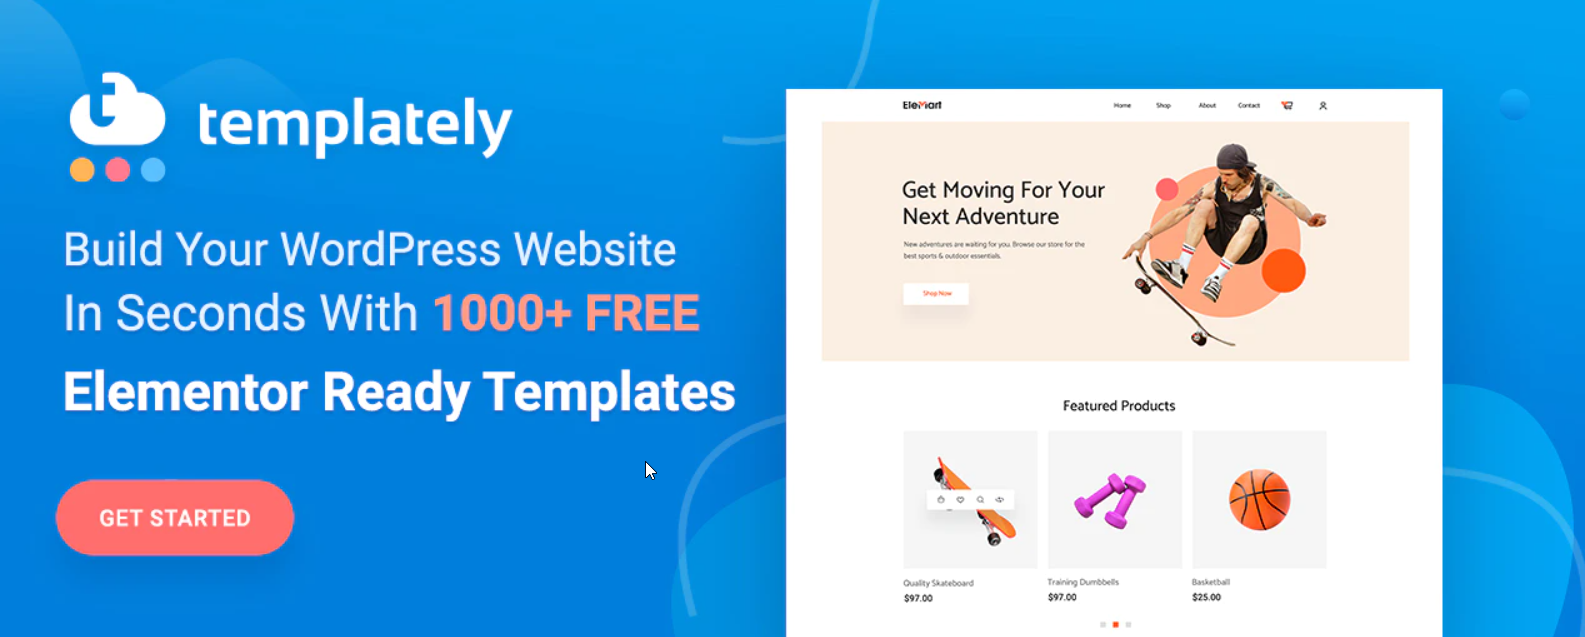 Best Ready Elementor Template Packs: March 2021 Edition 4